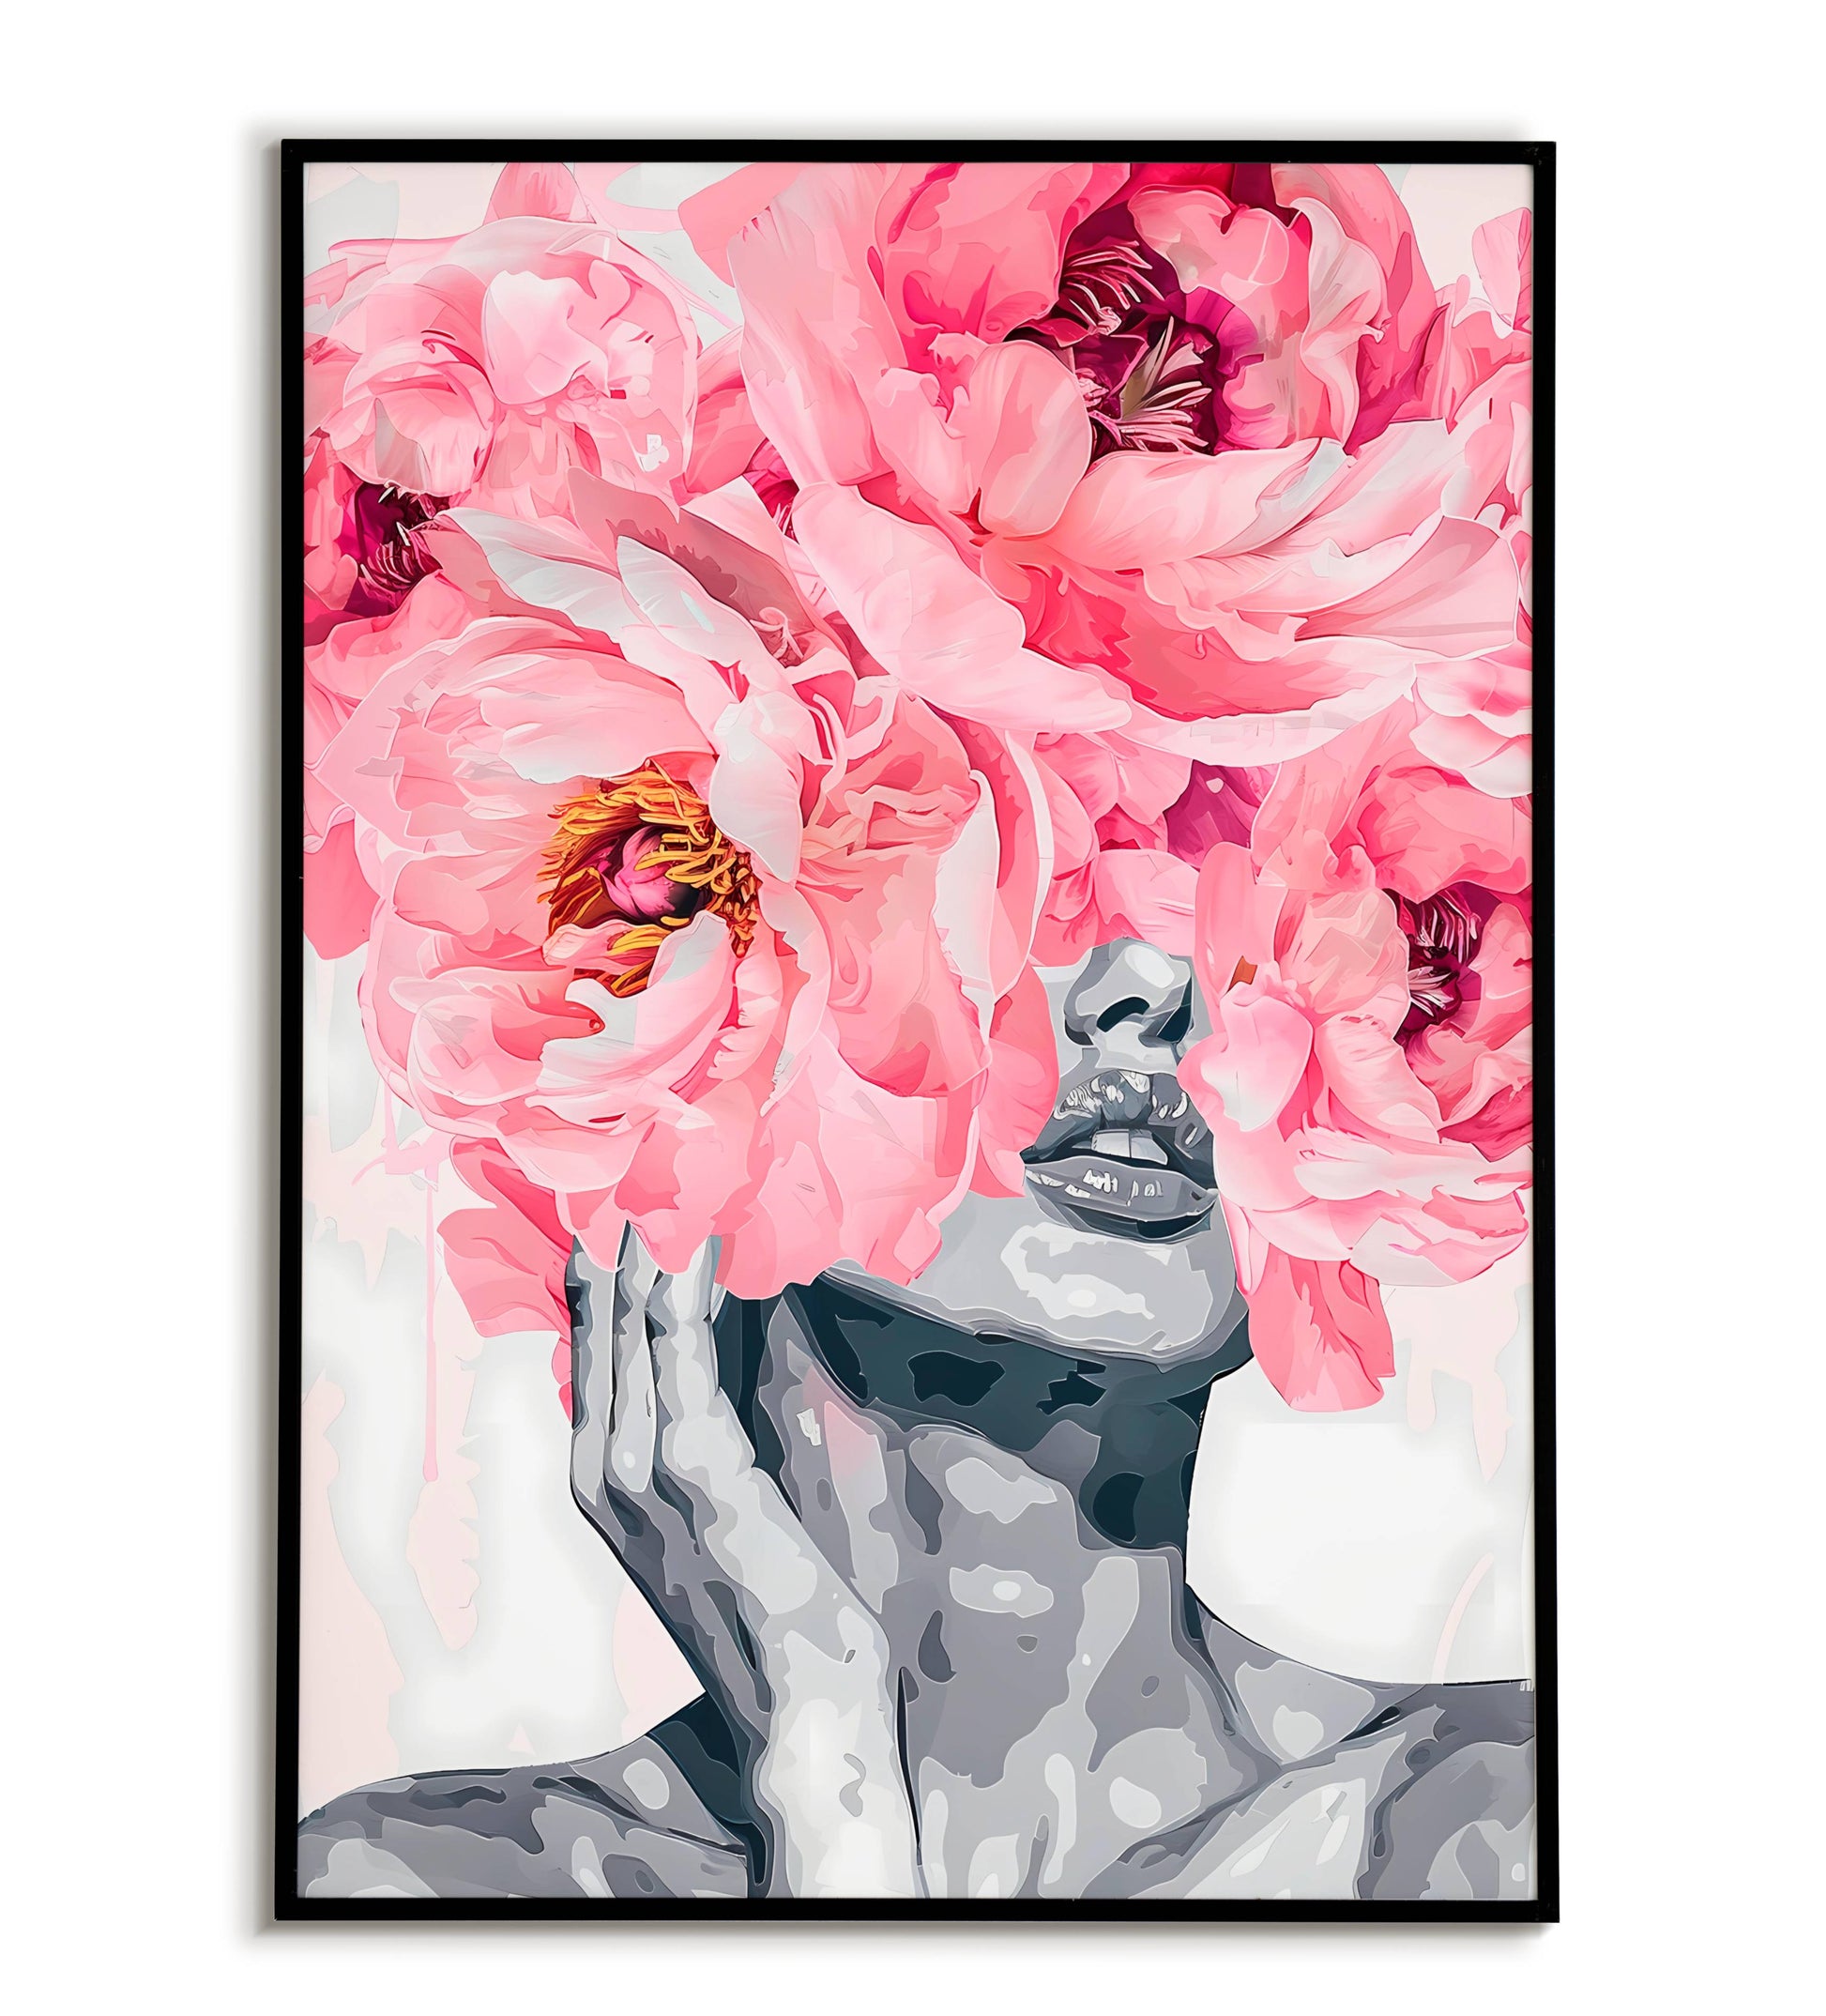 "Pink Flowers Head" abstract floral portrait. 